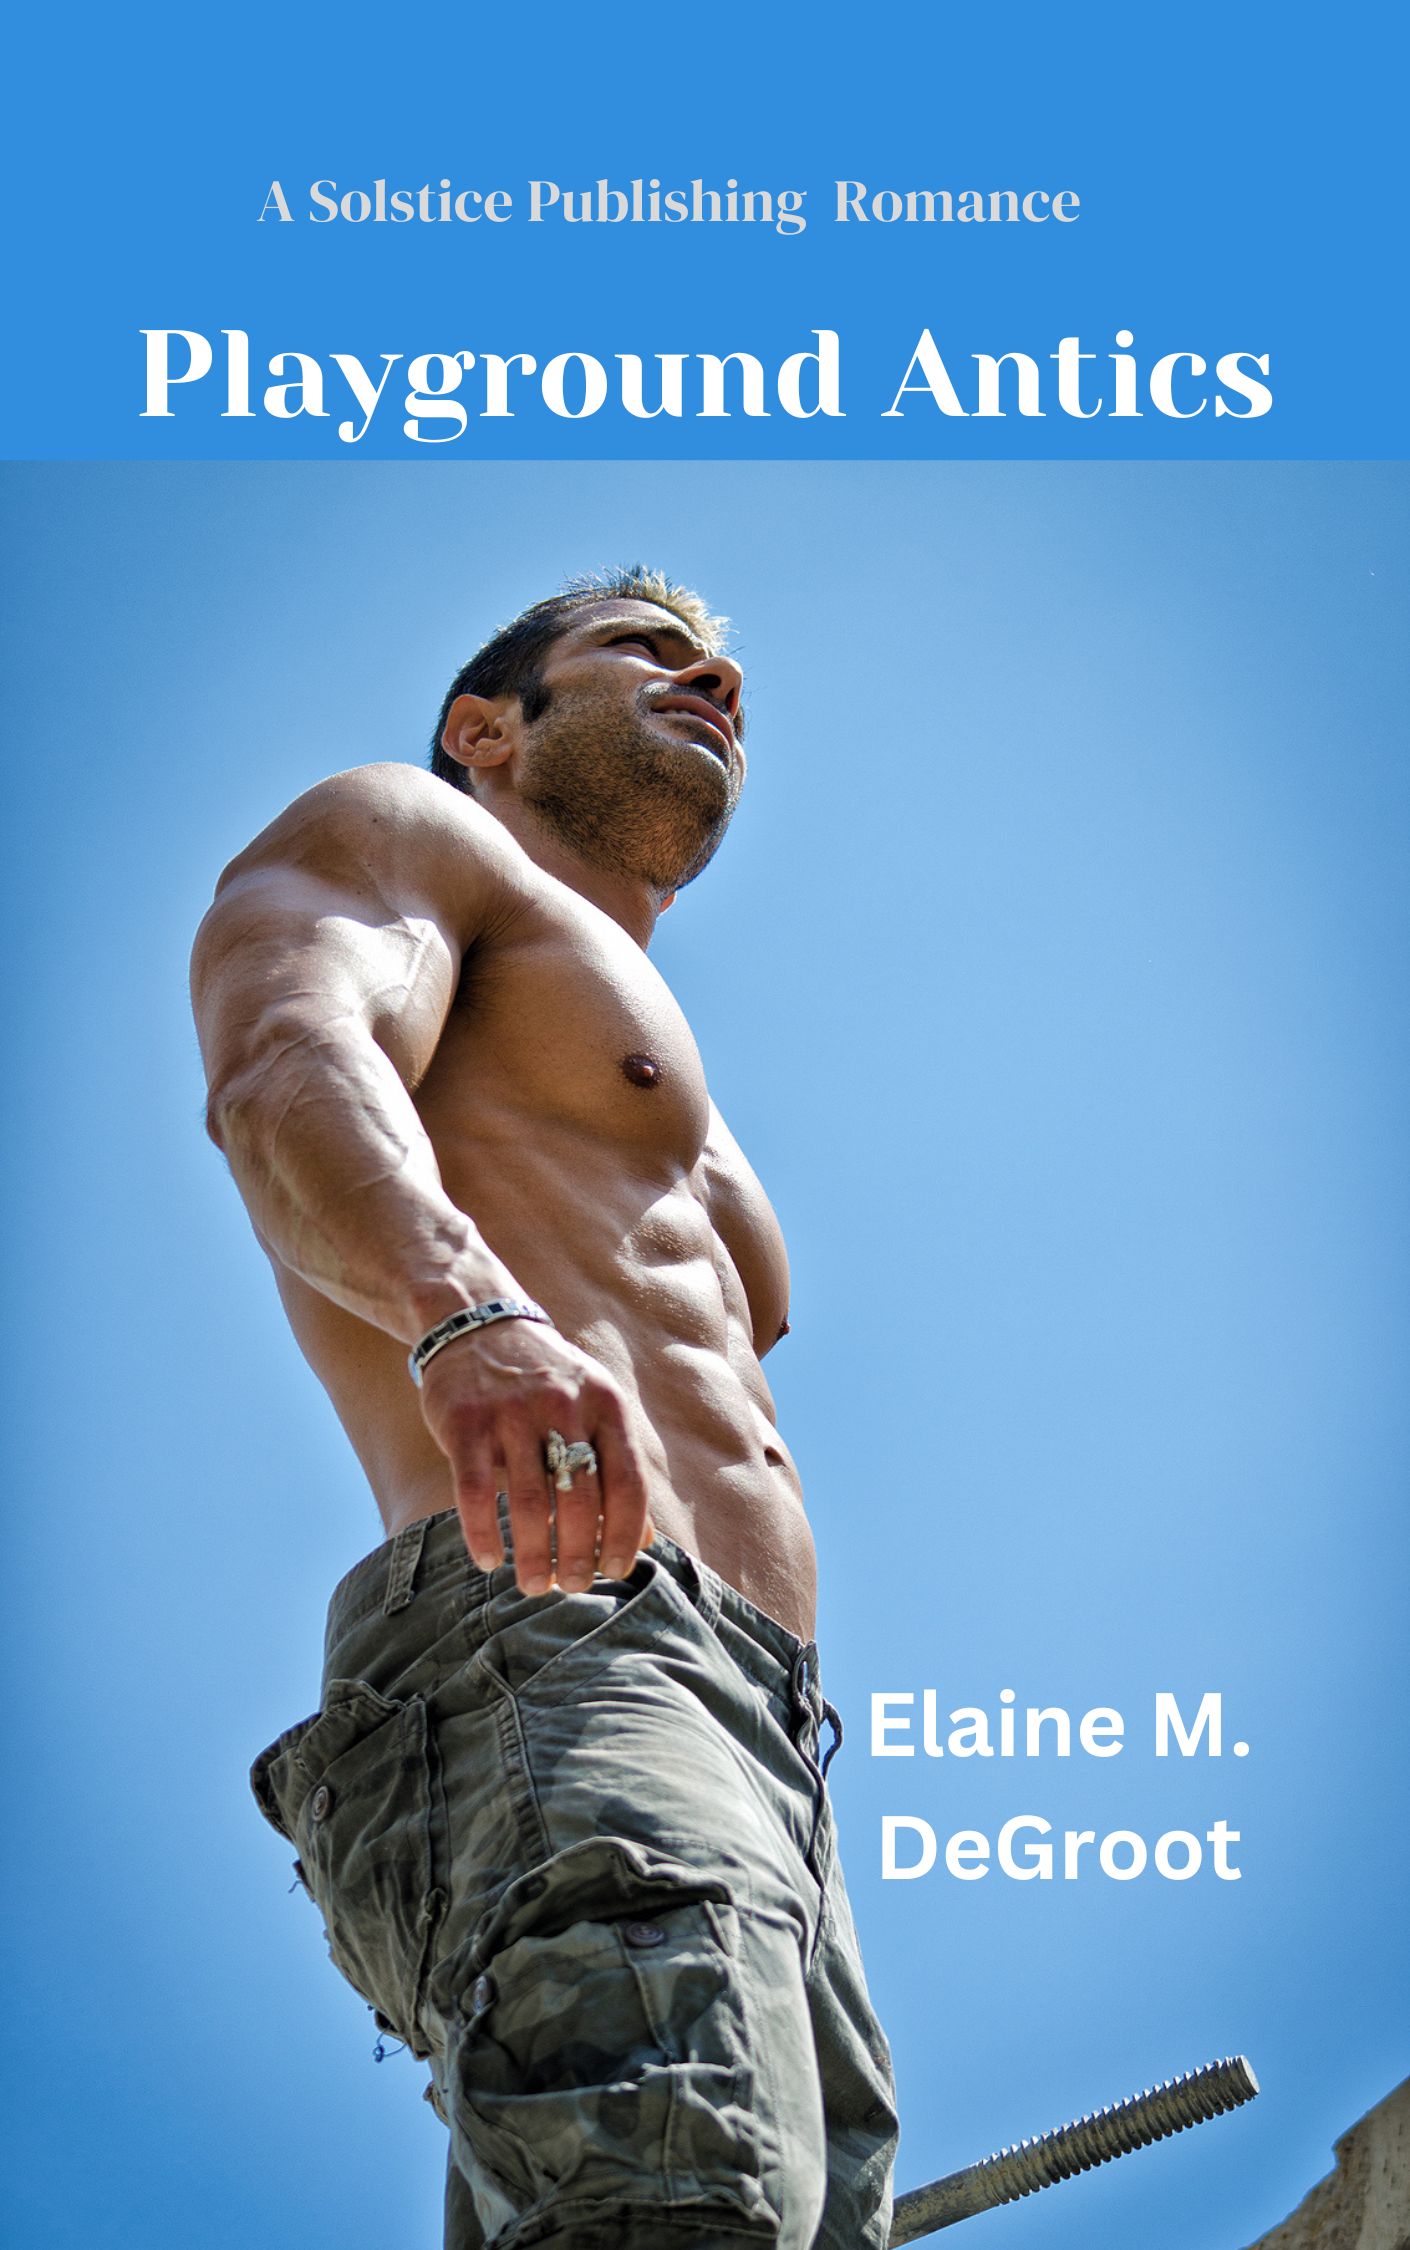 A shirtless construction worker against a blue sky background